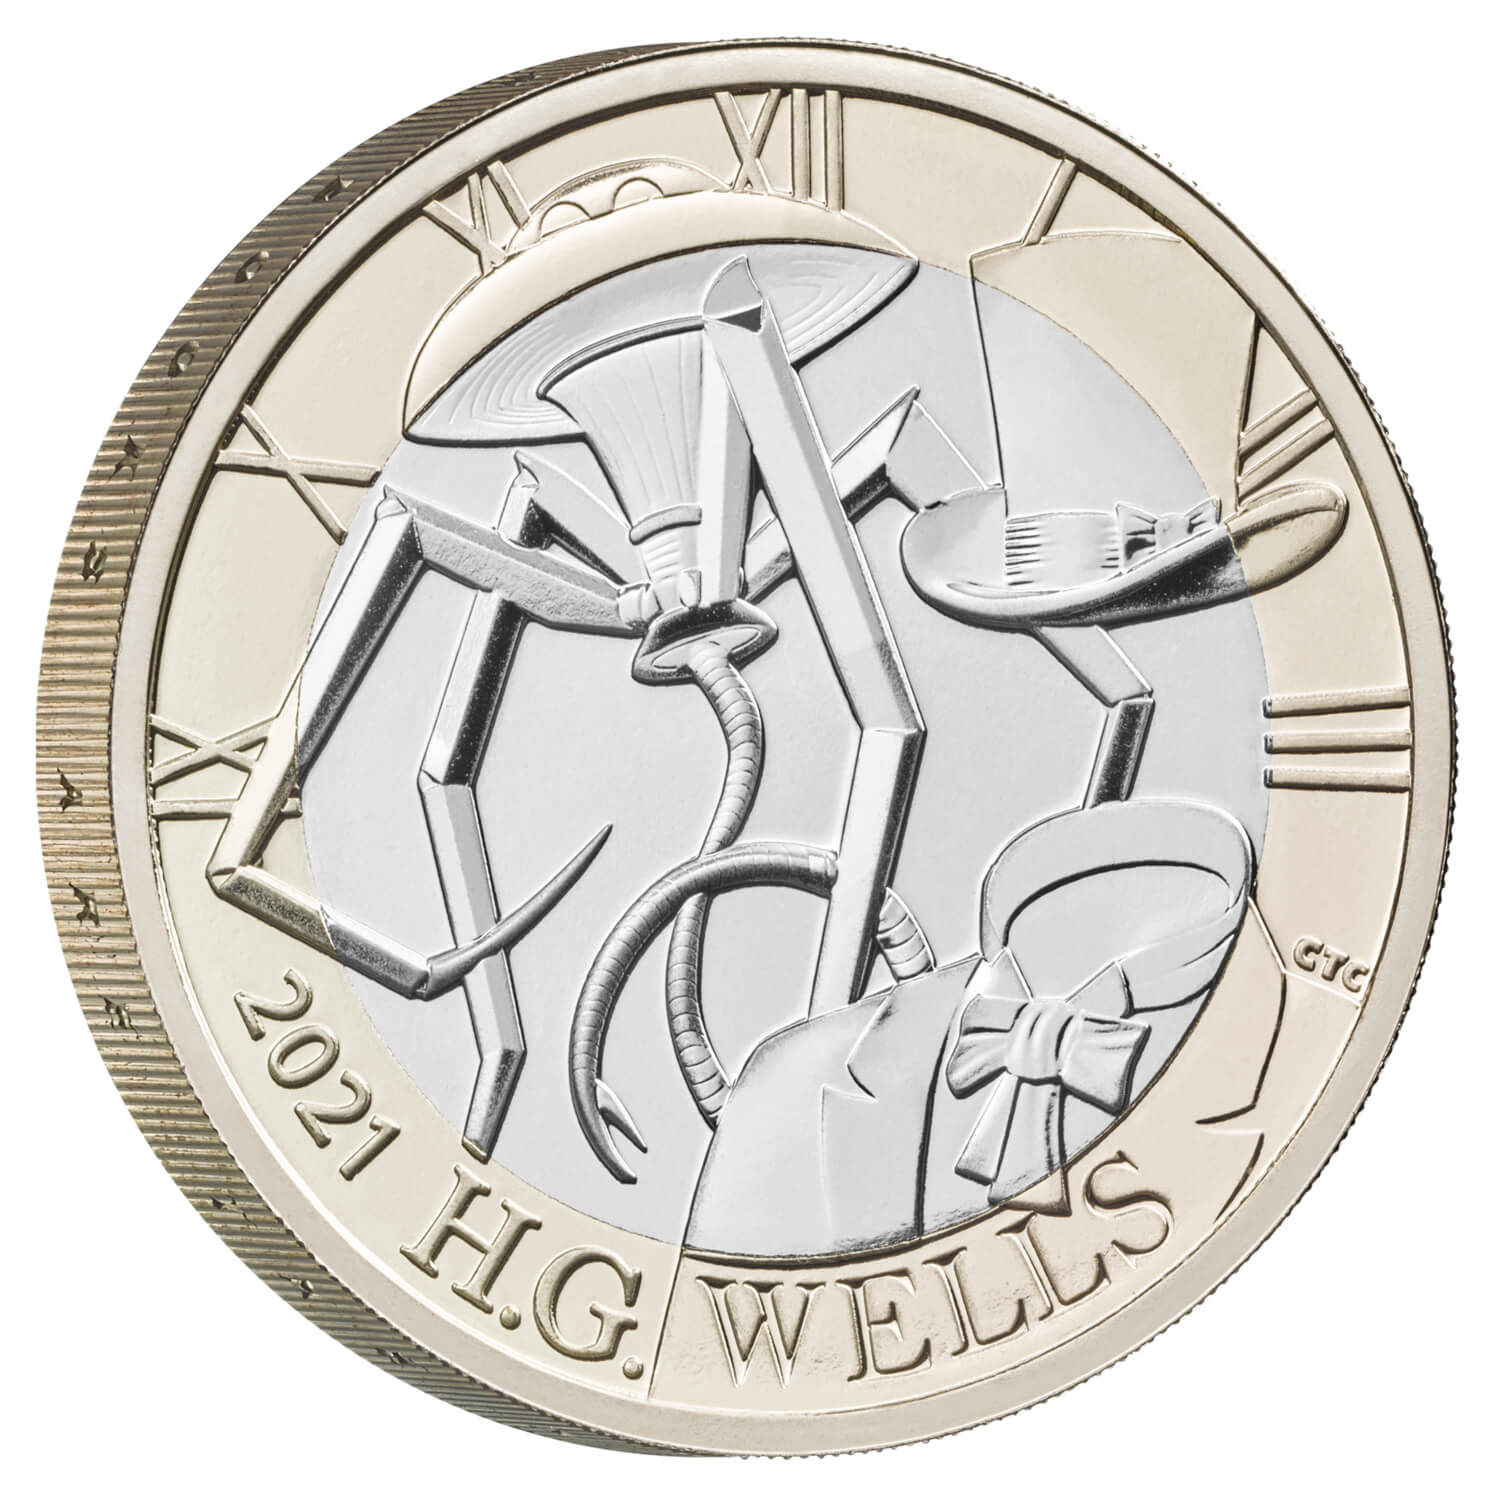 Celebrating the Life and Work of H G  Wells 2021 UK £2 Brilliant Uncirculated Coin